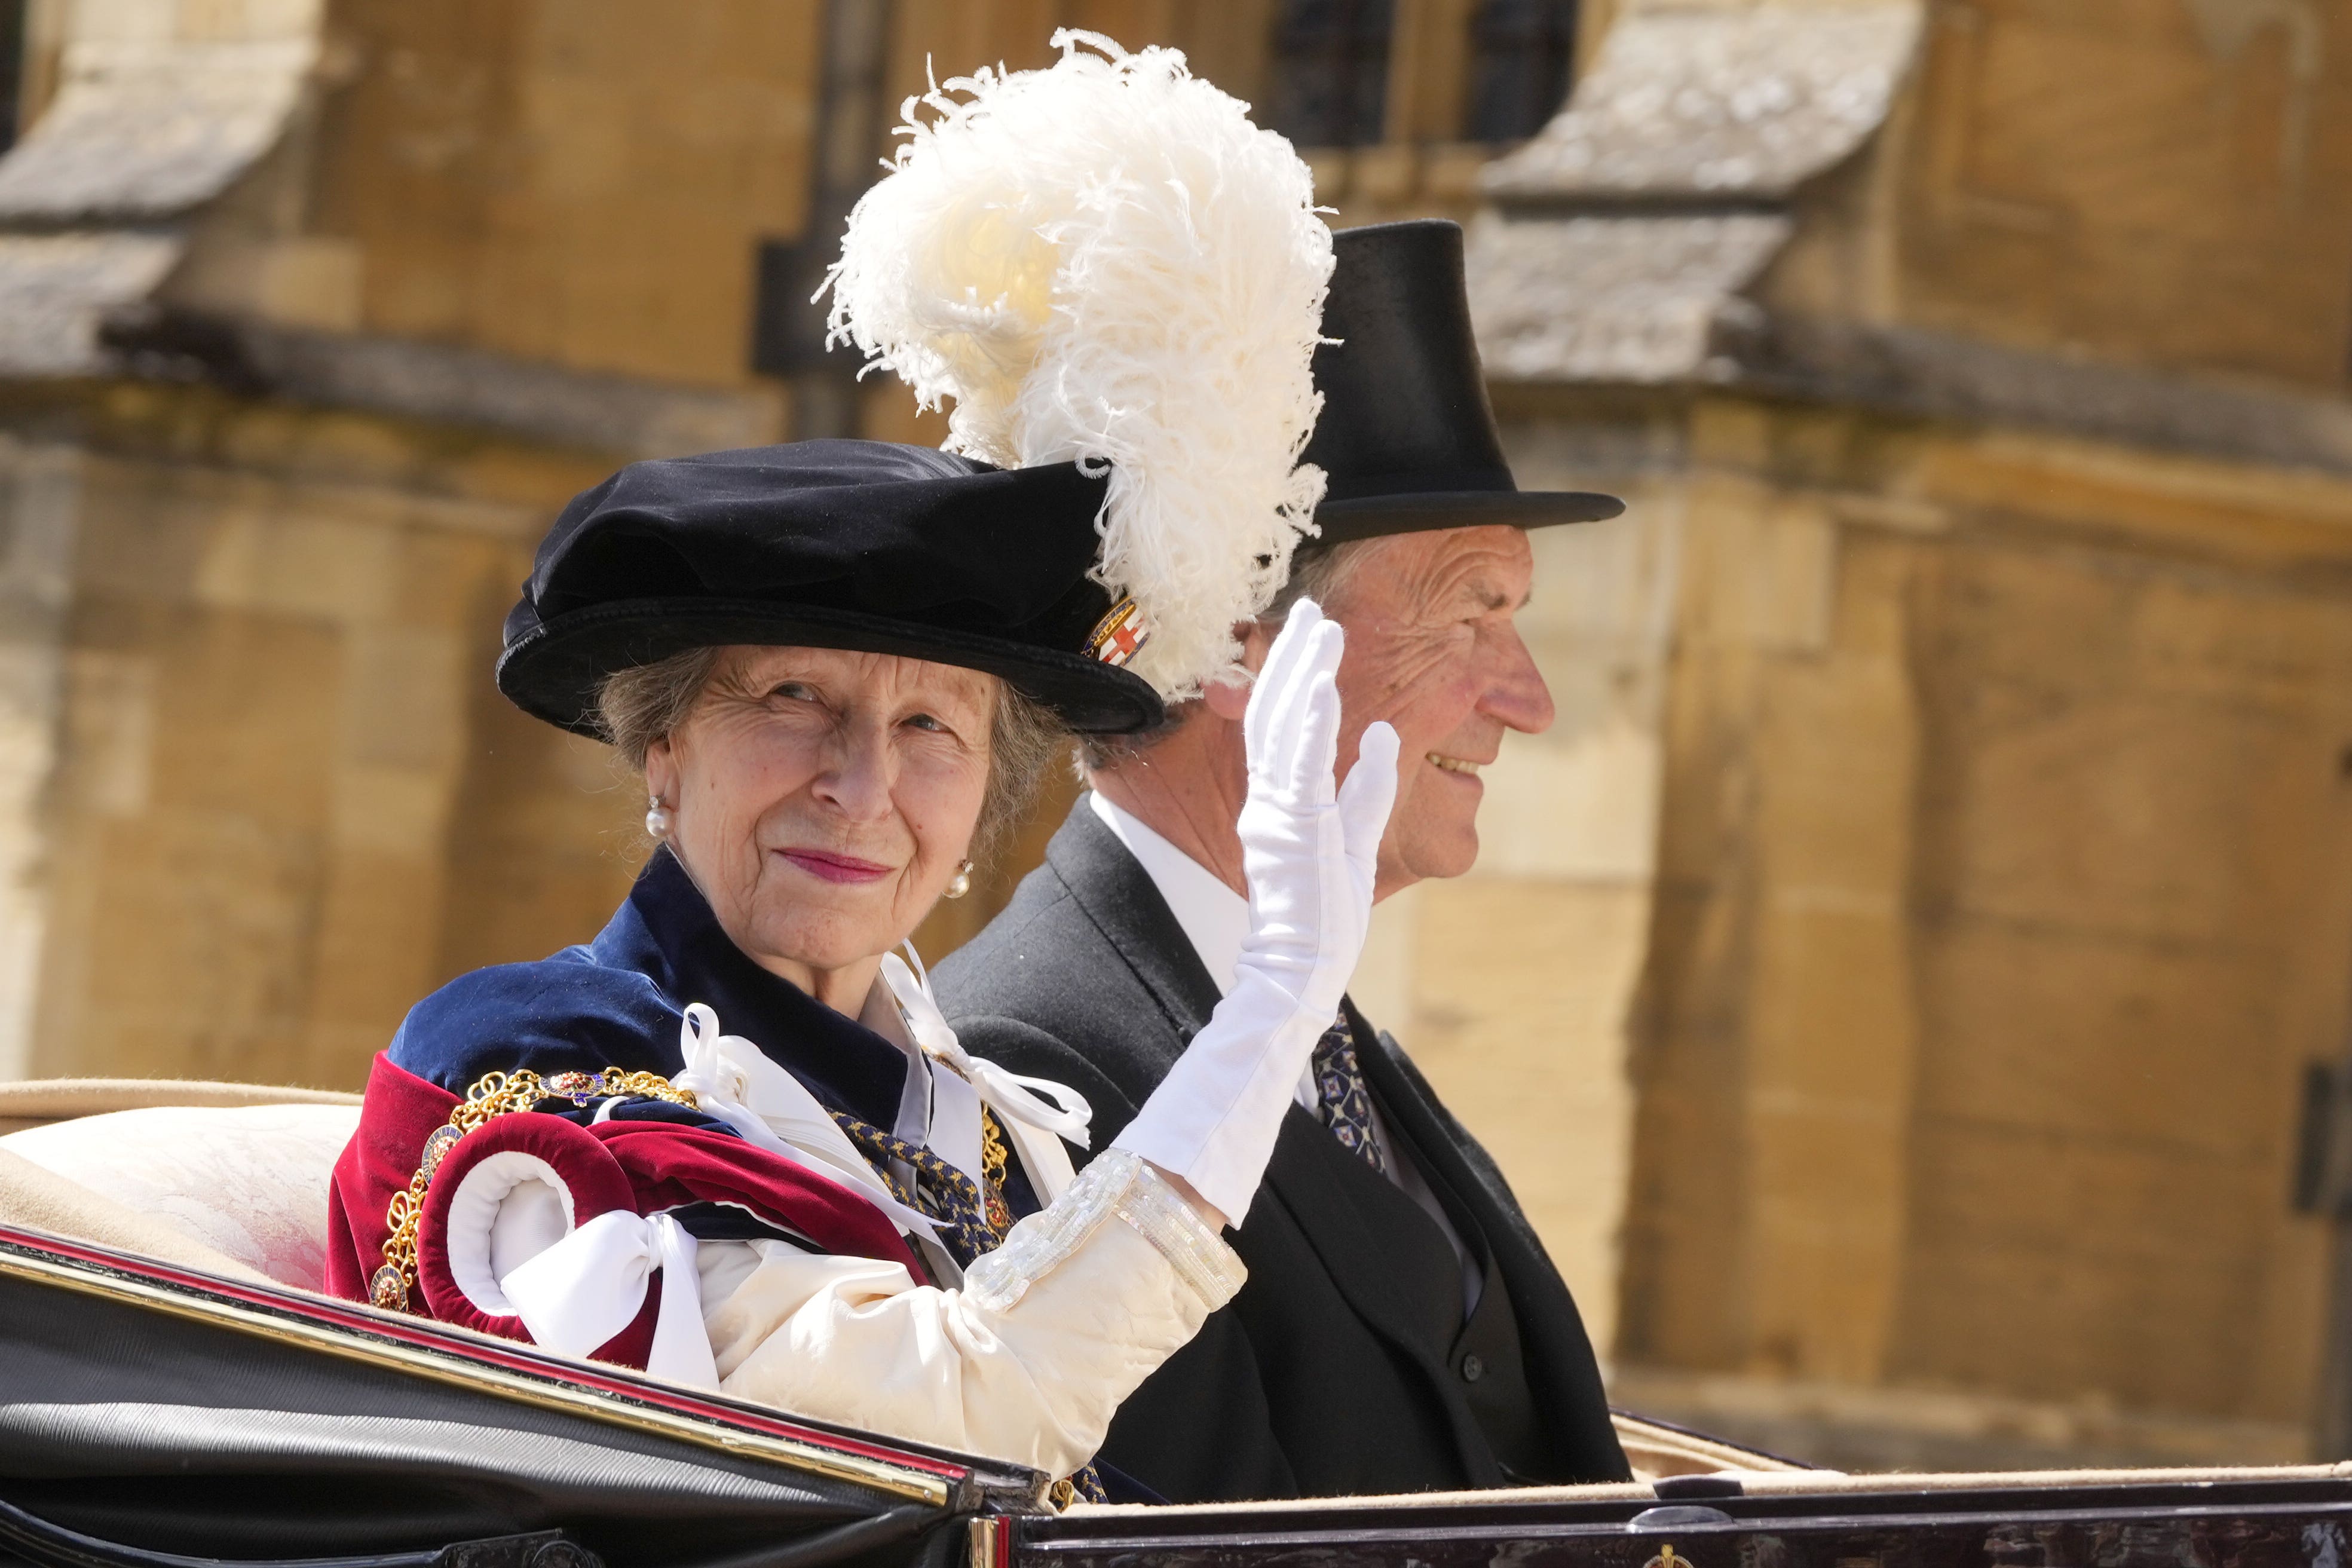 The Princess Royal has attended more engagements than any other member of the family this year.